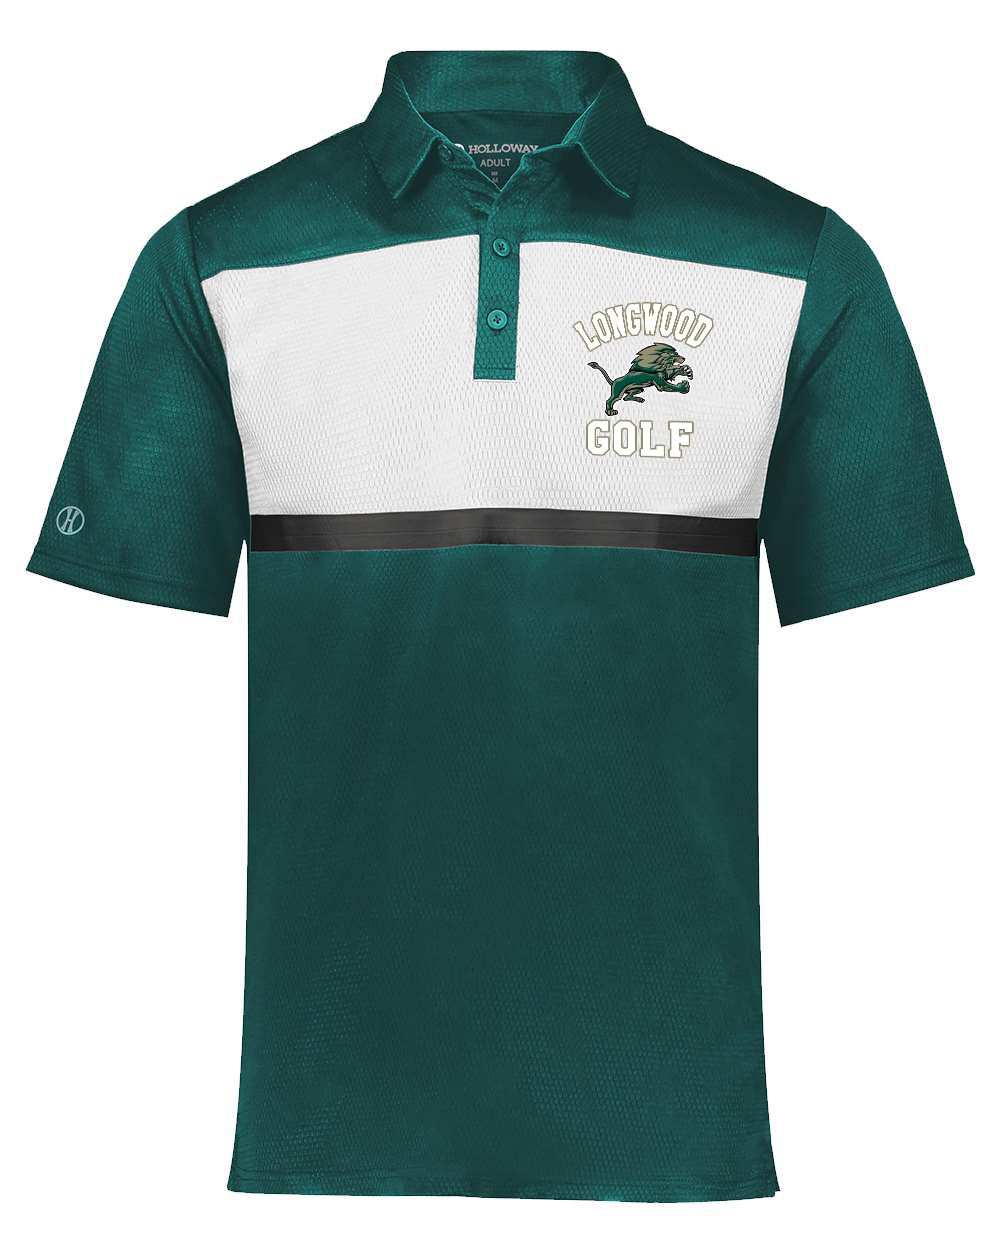 Prism Bold Polo by Holloway